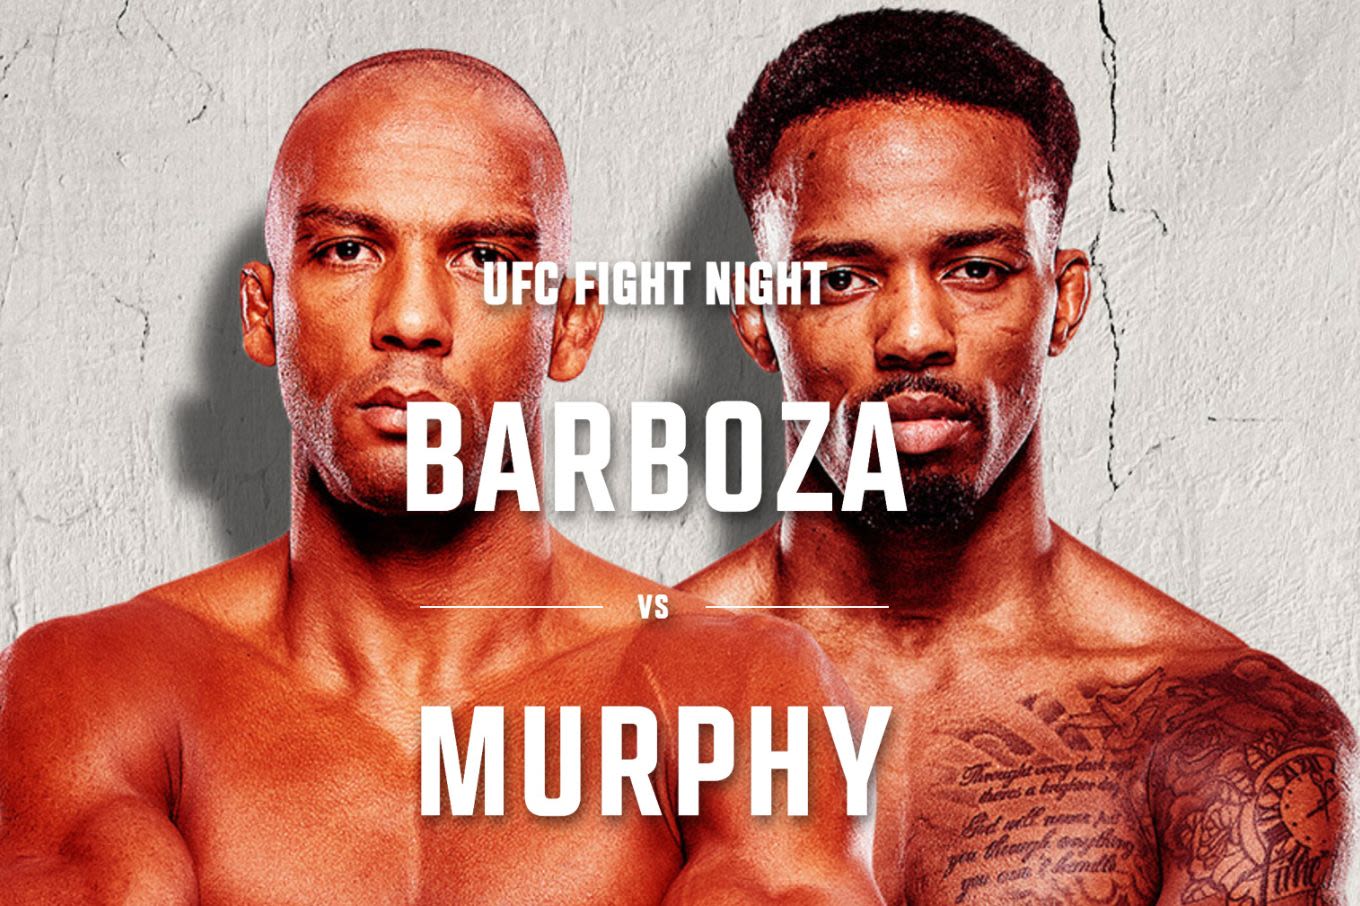 How To Watch UFC Fight Night: Barboza vs. Murphy Live Online